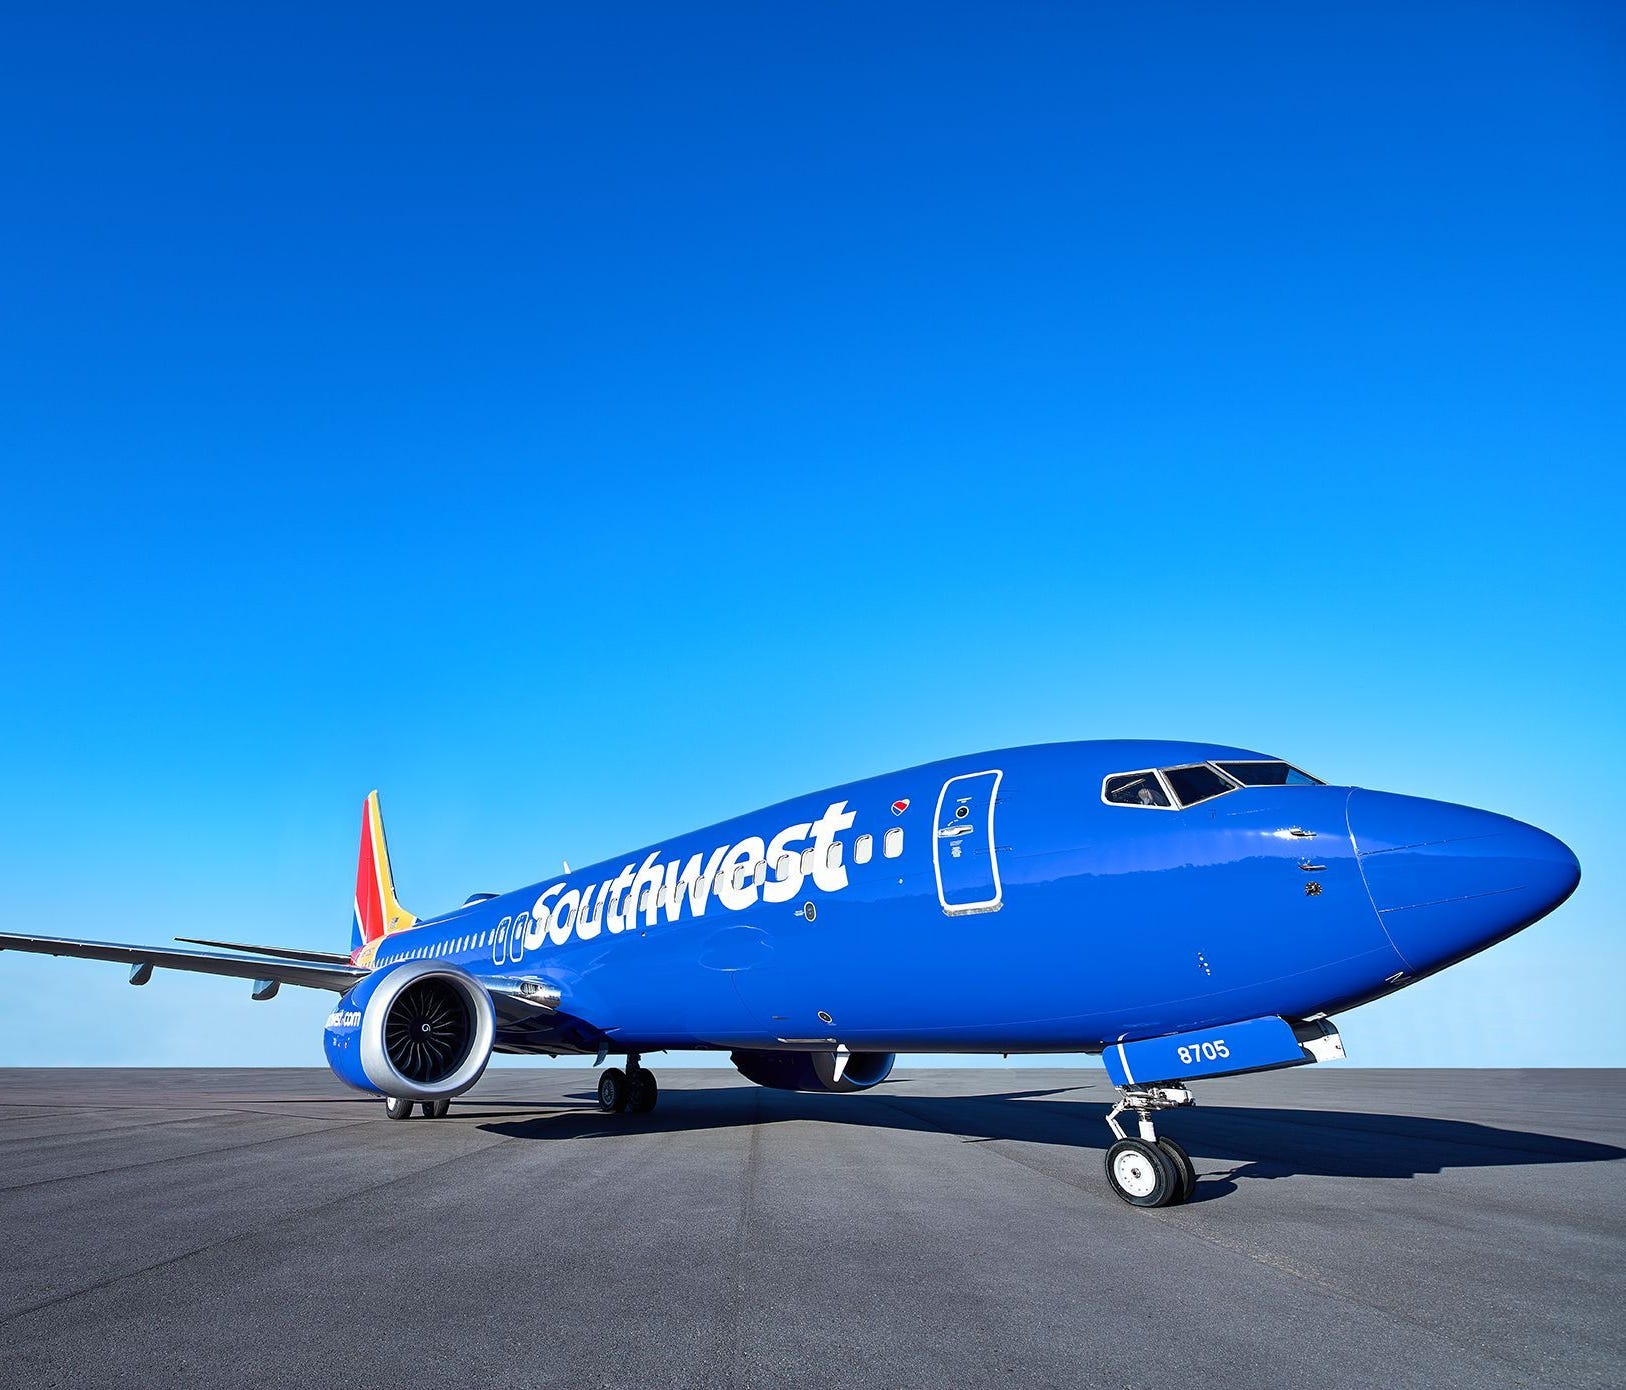 A Southwest Airlines Boeing 737 Max aircraft is seen in this photo provided by the airline.